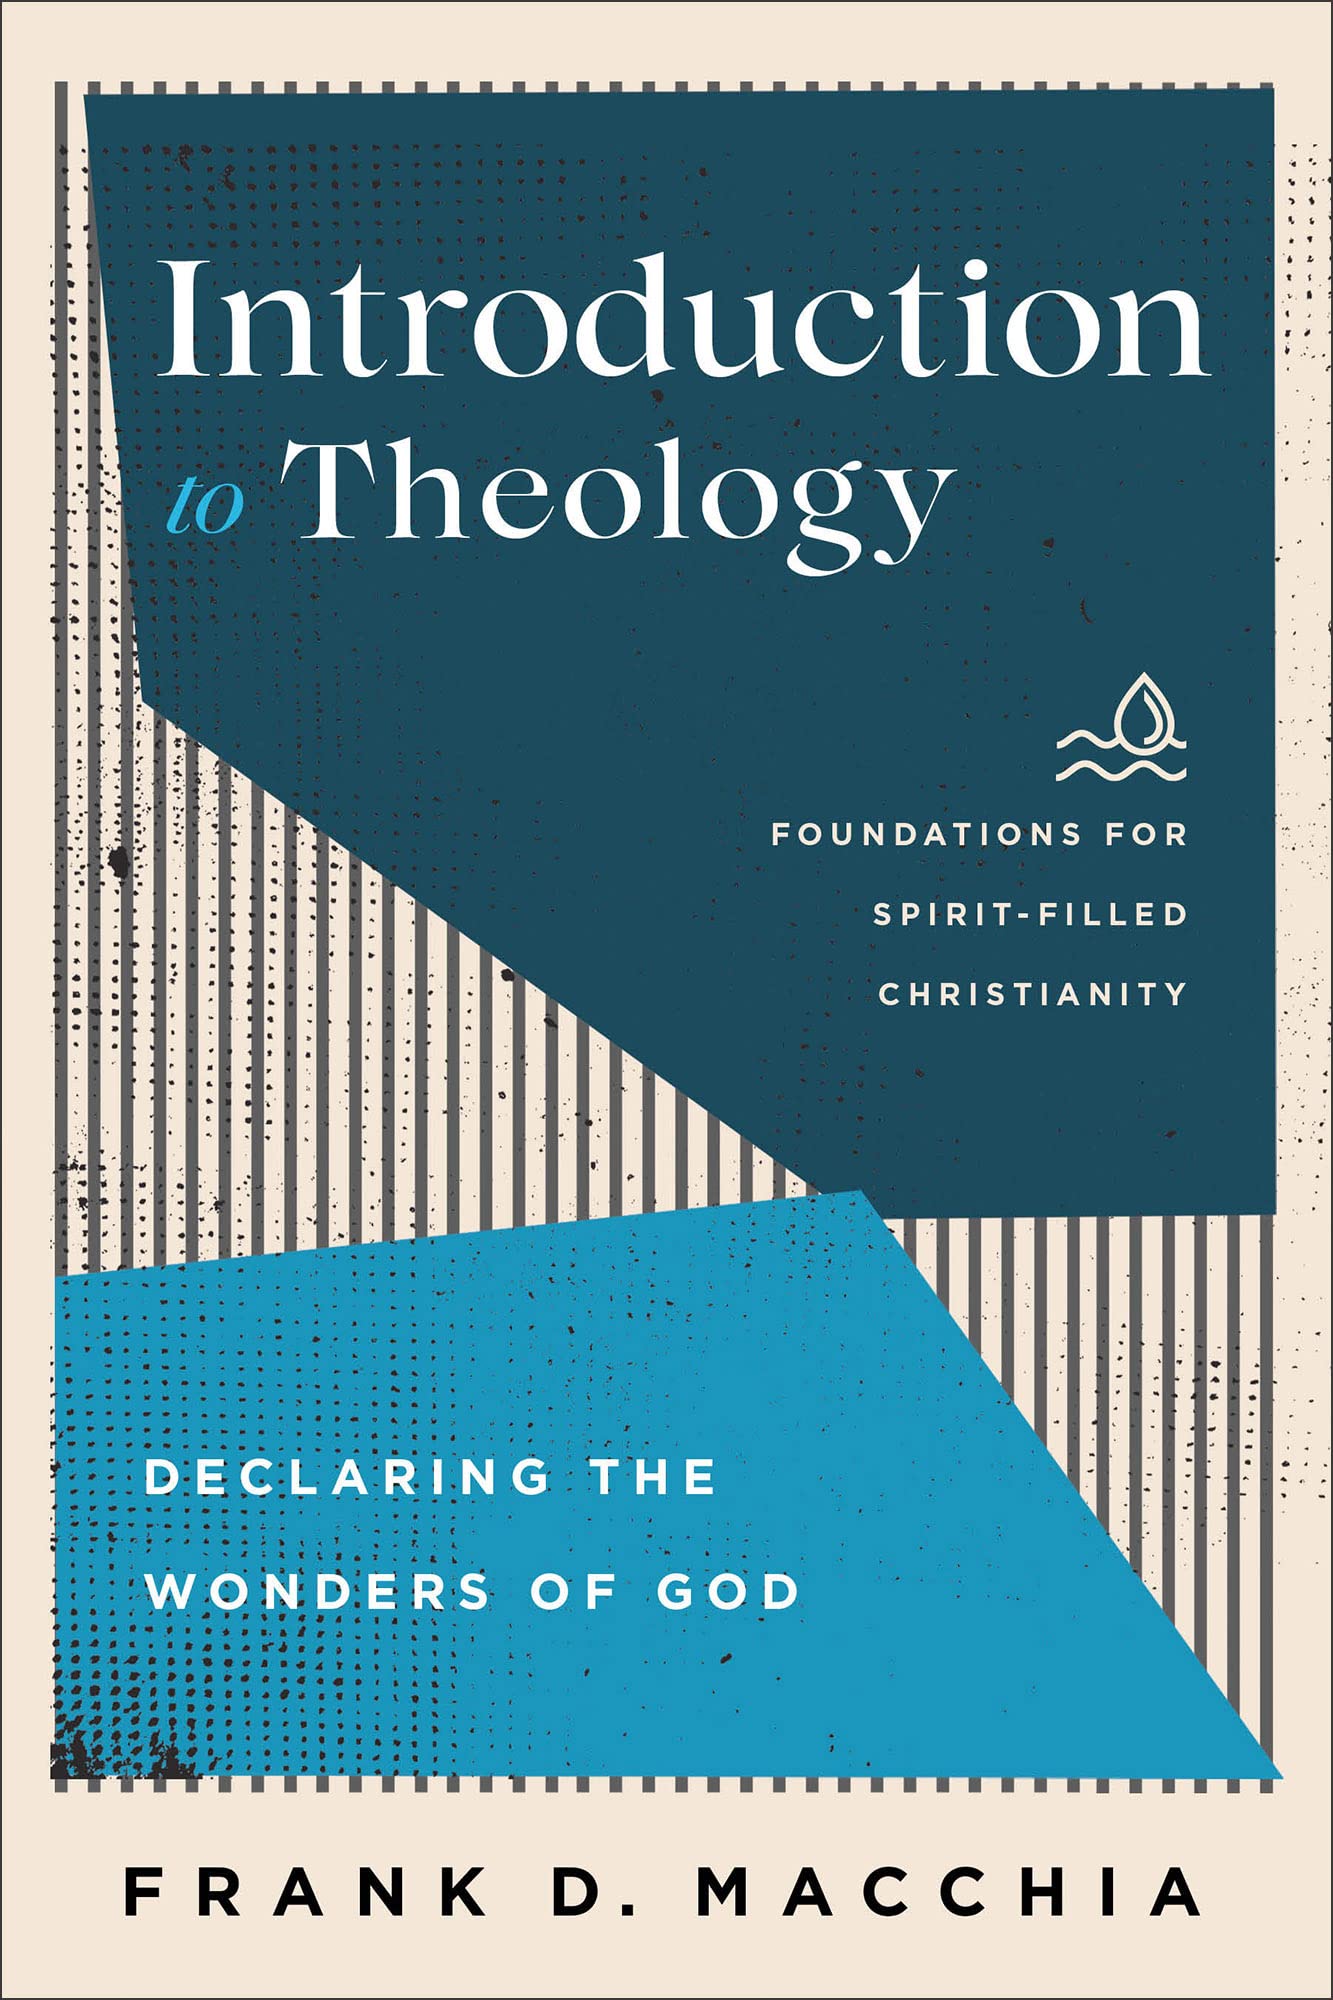 Introduction to Theology (Foundations for Spirit-Filled Christianity): Declaring the Wonders of God